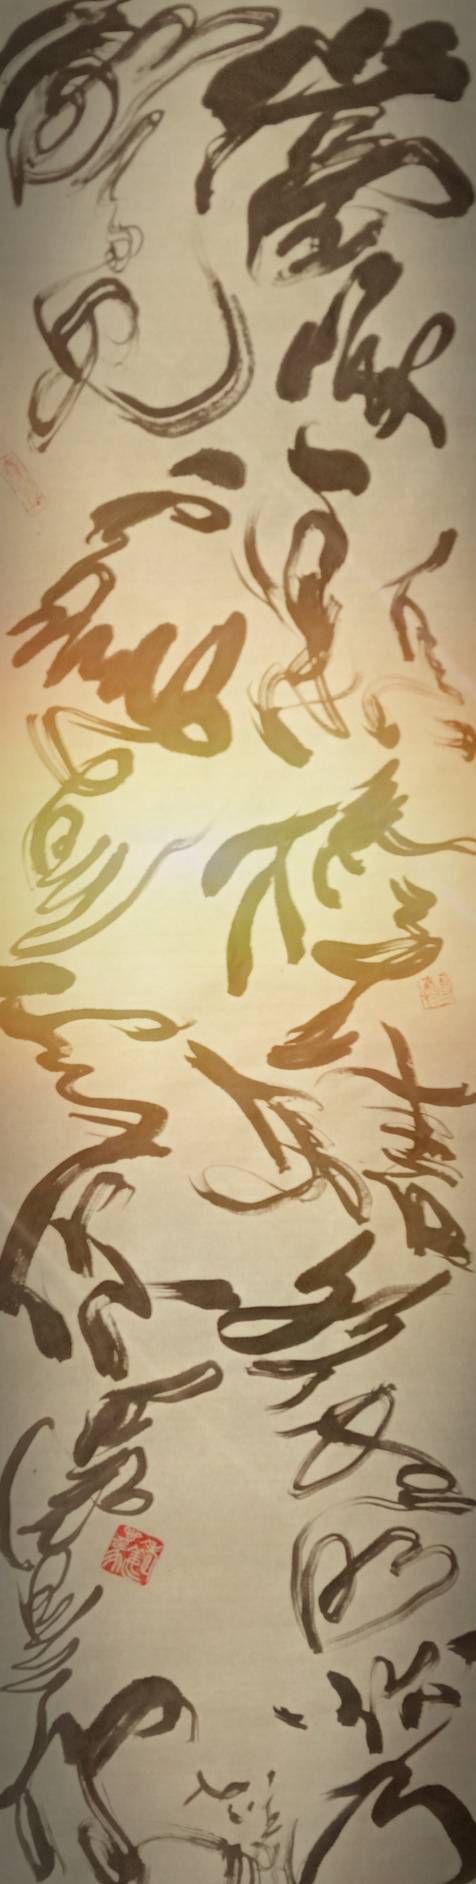 img-Together Forever (Multiple Perspectives Chinese calligraphy)